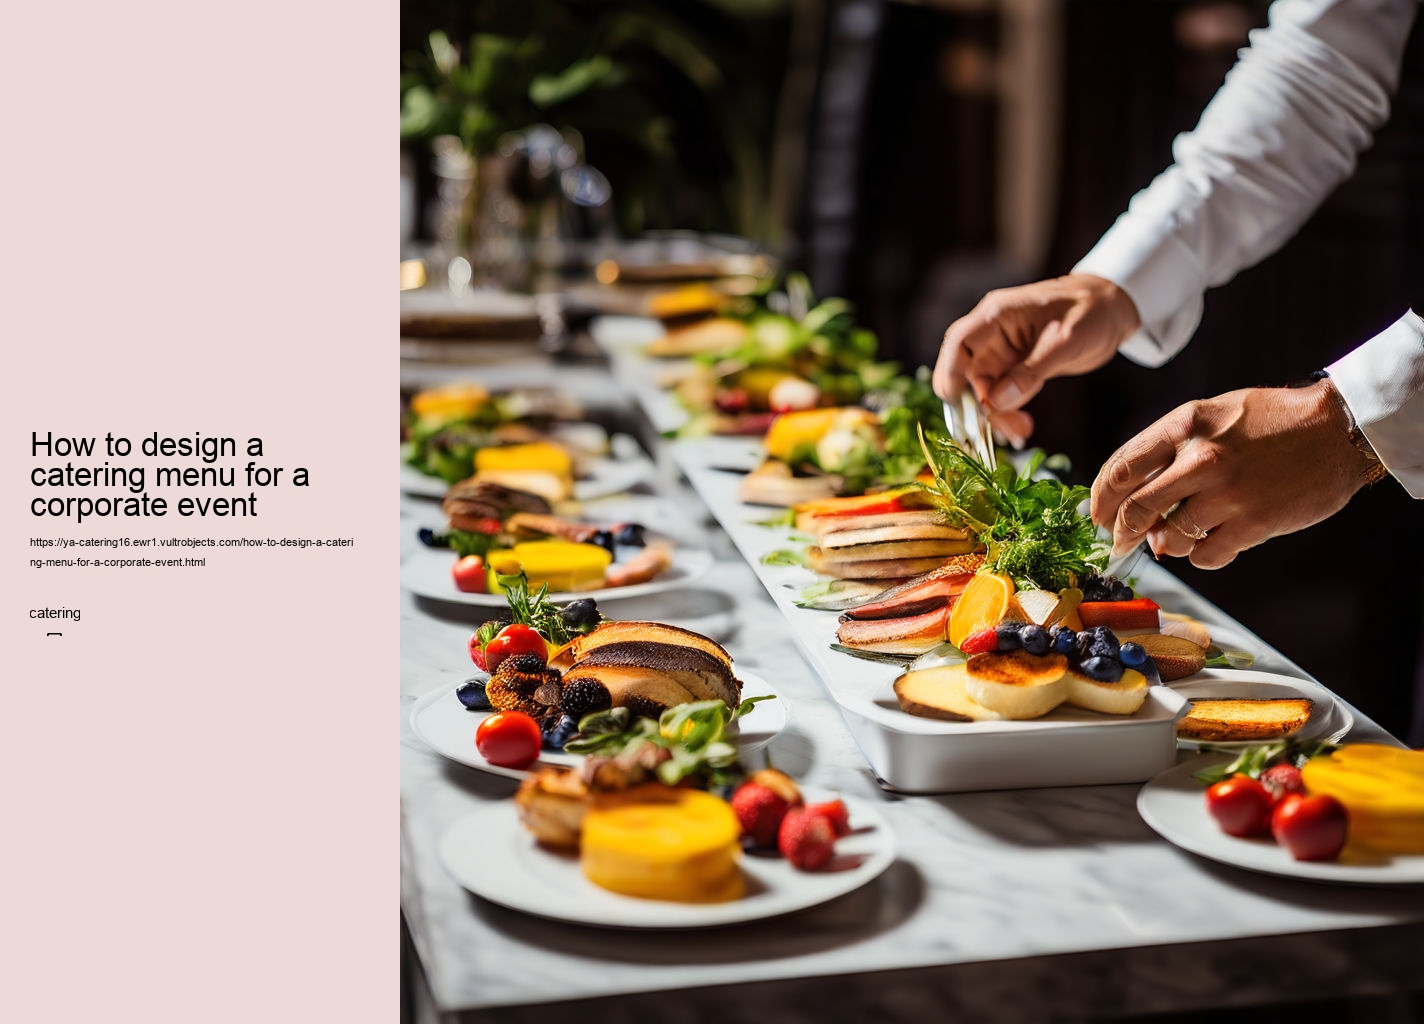 How to design a catering menu for a corporate event